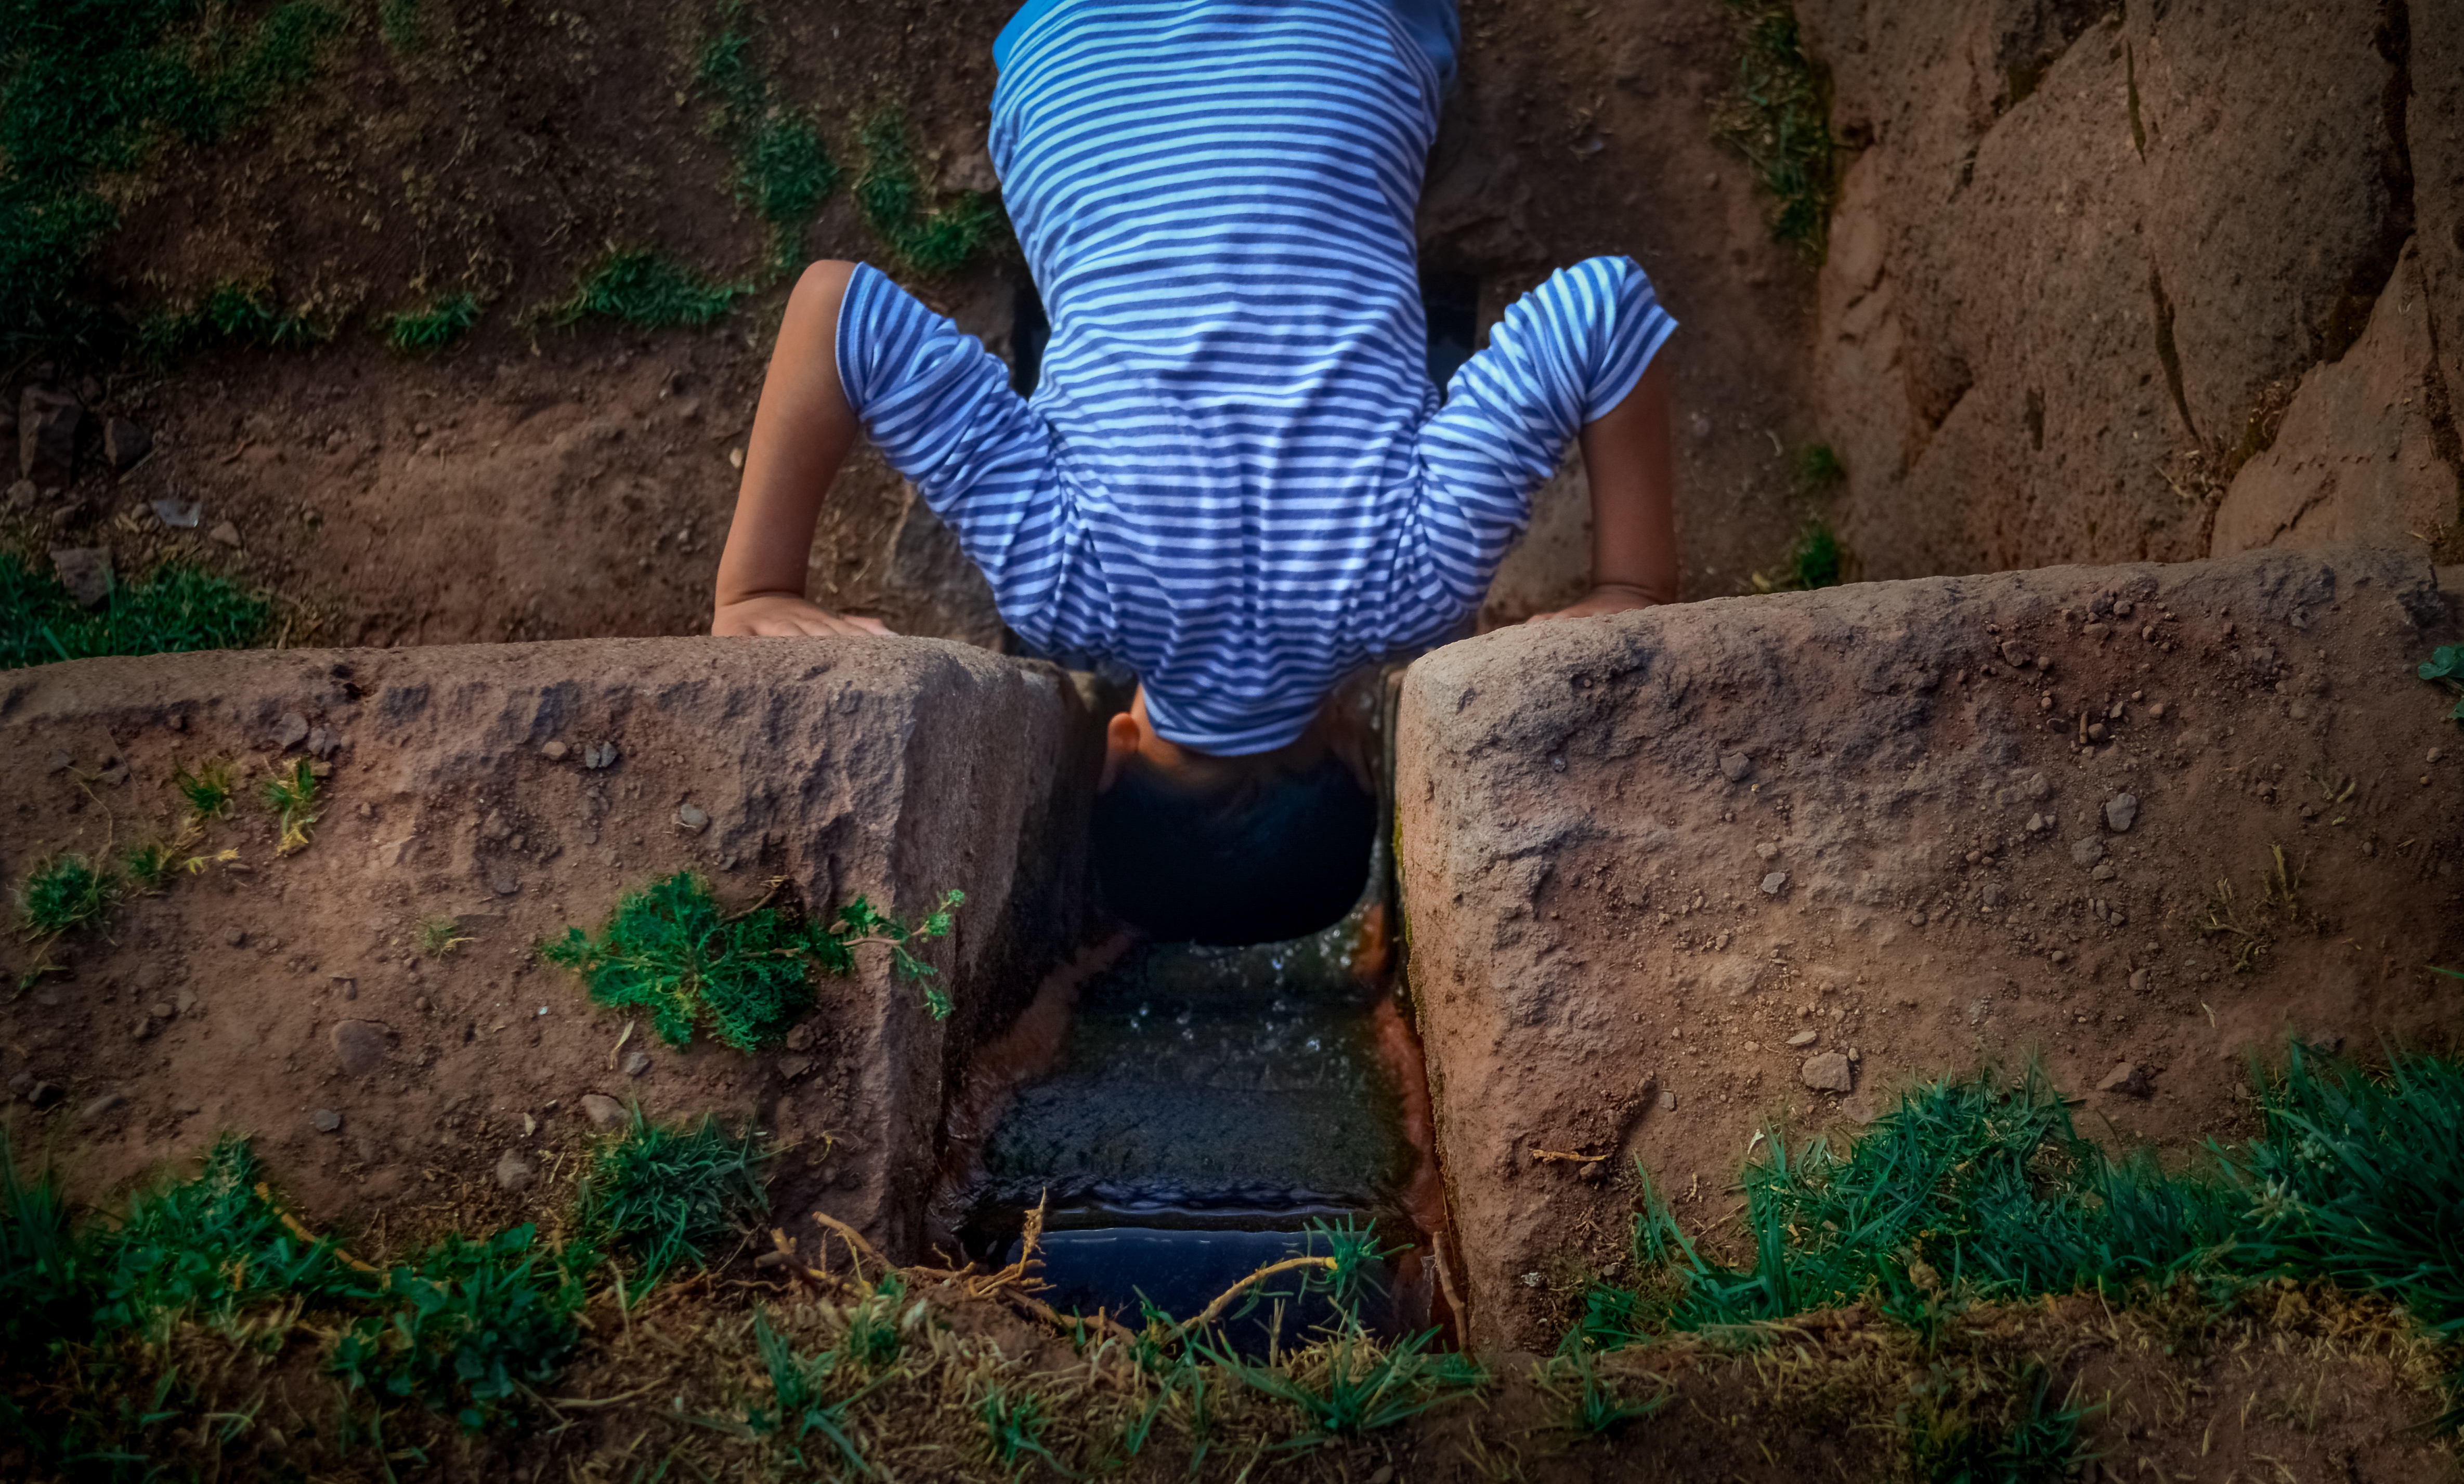 A small boy wearing a light blue striped shirt dips is head into a water stream carved out of a rock wall